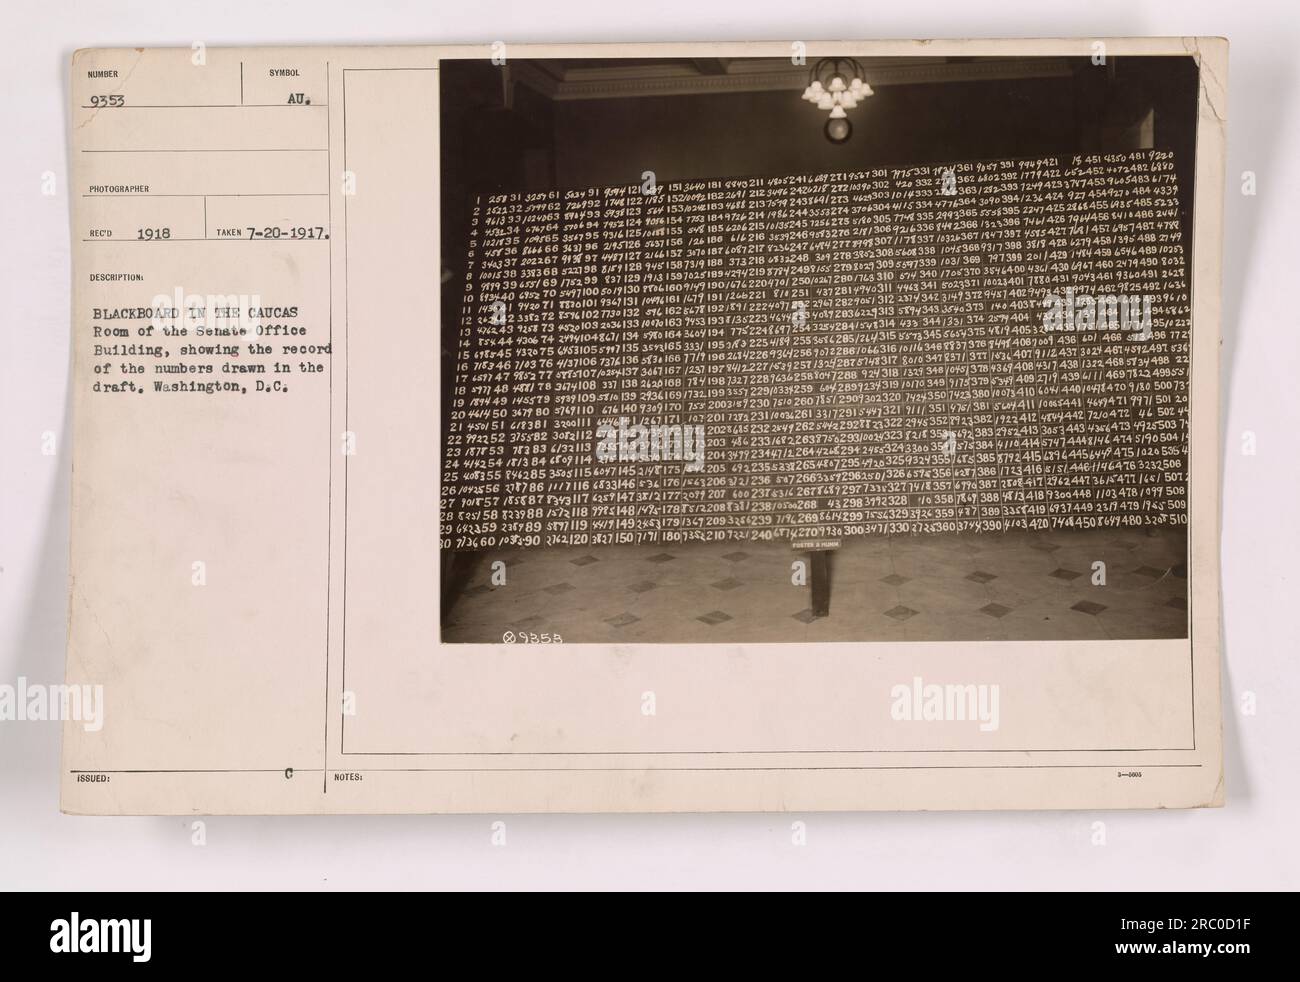 Draft numbers being drawn on a blackboard in the Caucus Room of the Senate Office Building in Washington, D.C. during World War One. The blackboard shows a record of the numbers drawn during the draft. This photo was taken on July 20, 1917. Stock Photo